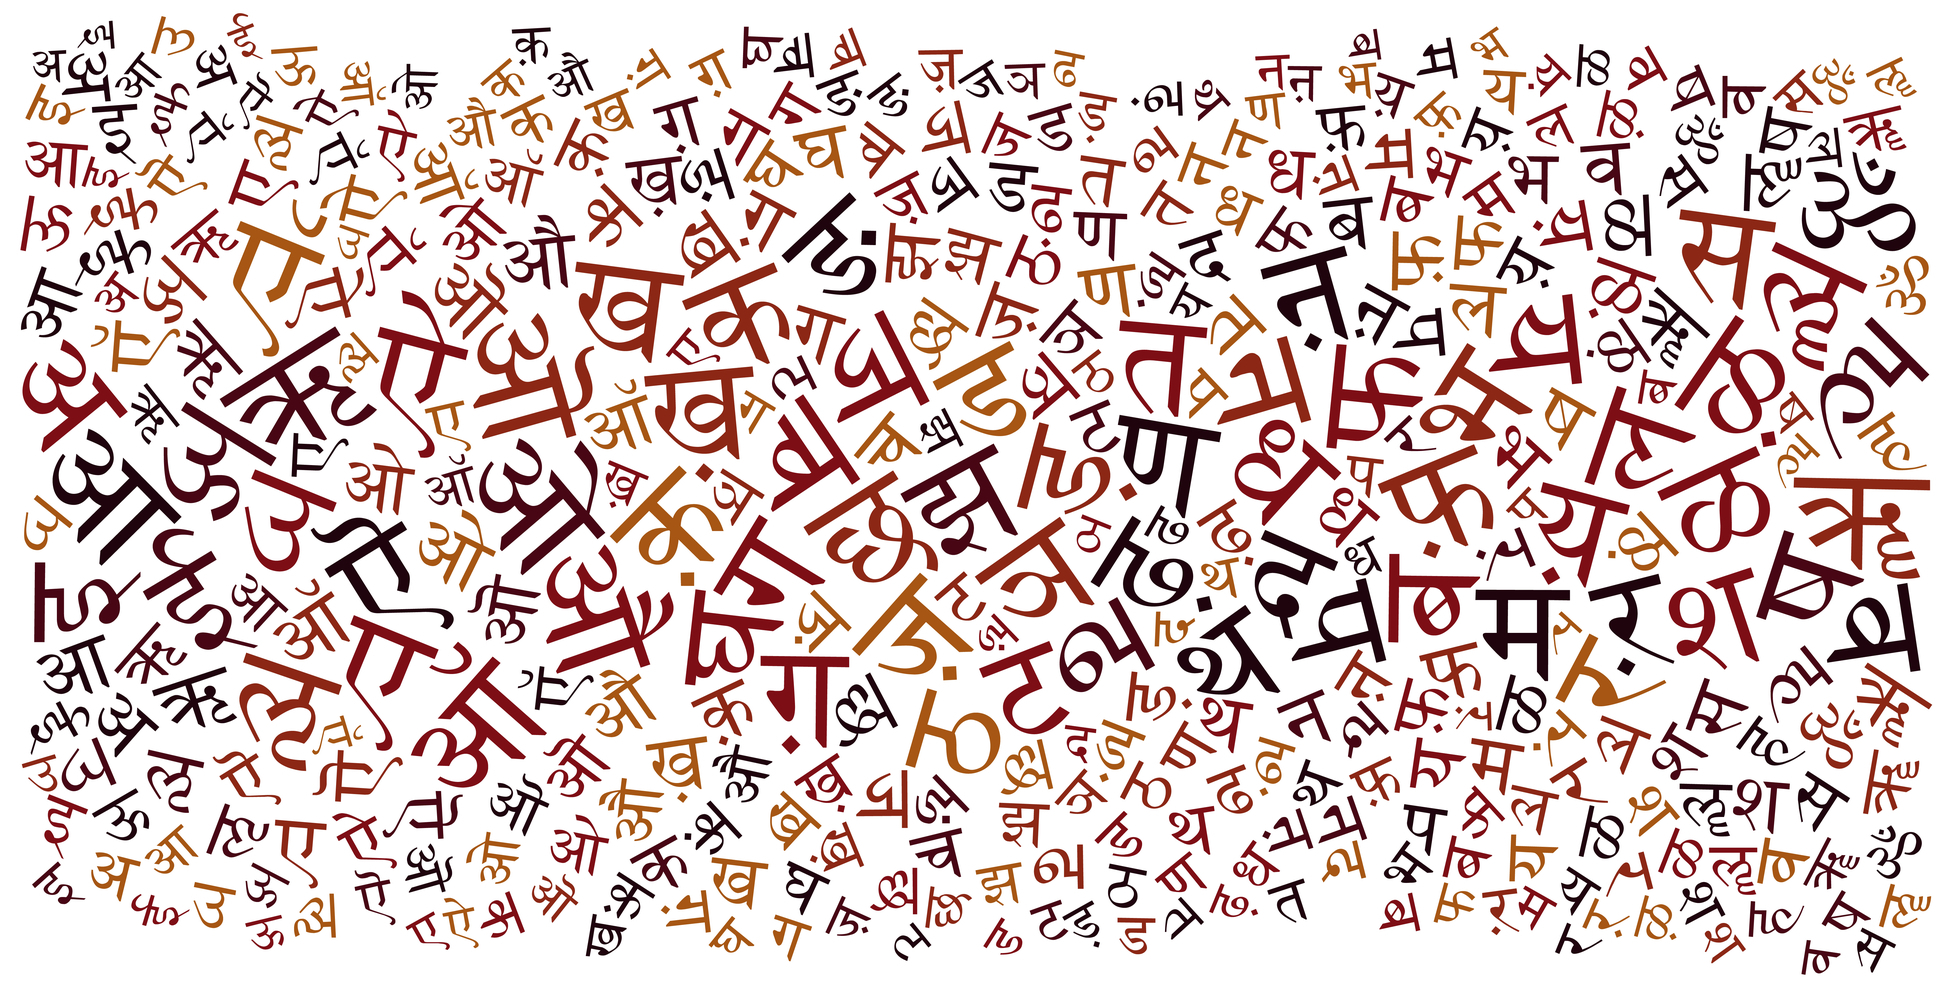 Bihar was 1st state to make Hindi an official language | National News